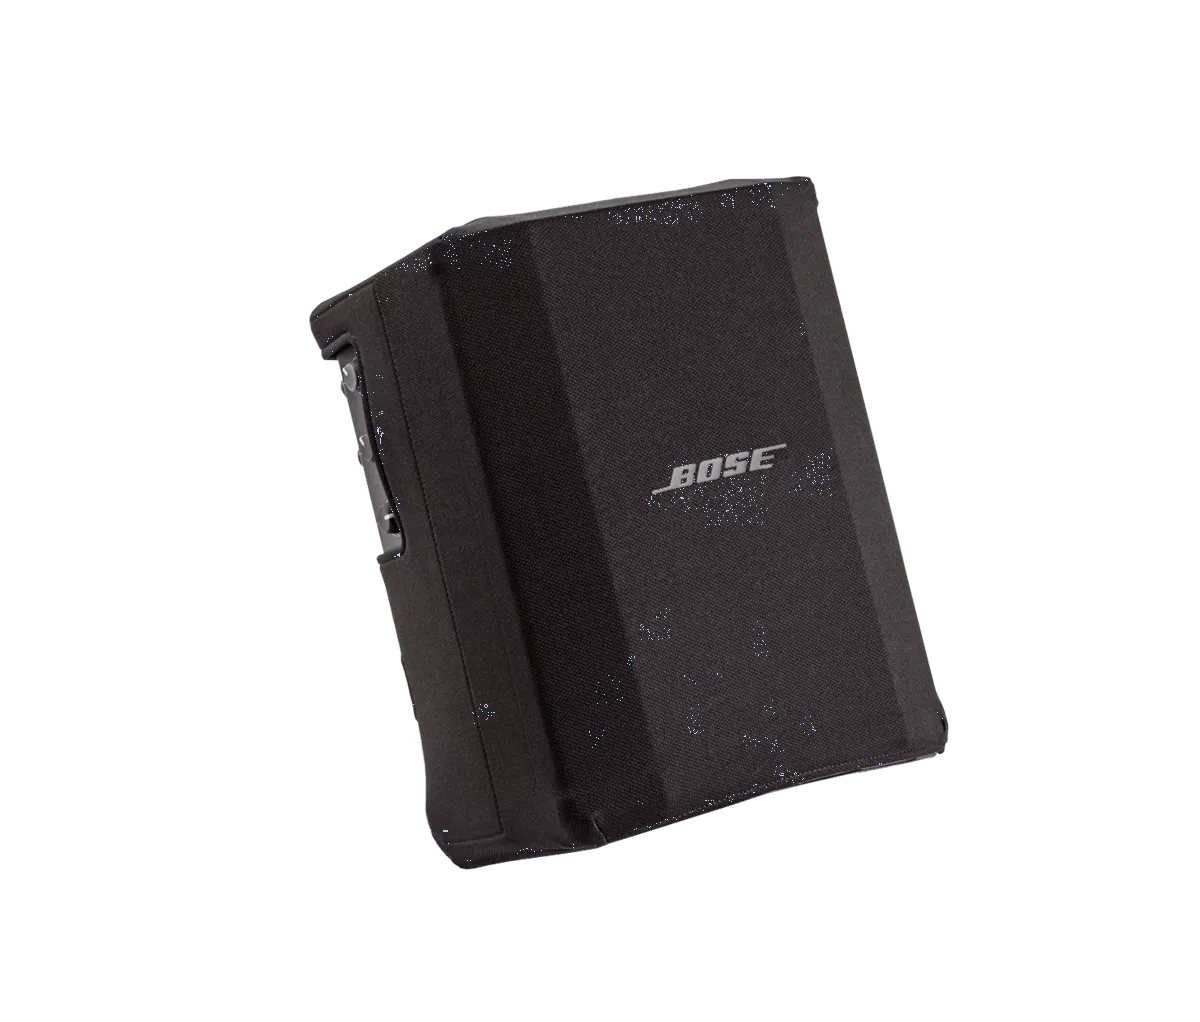 S1 Pro Play-Through Cover Bose